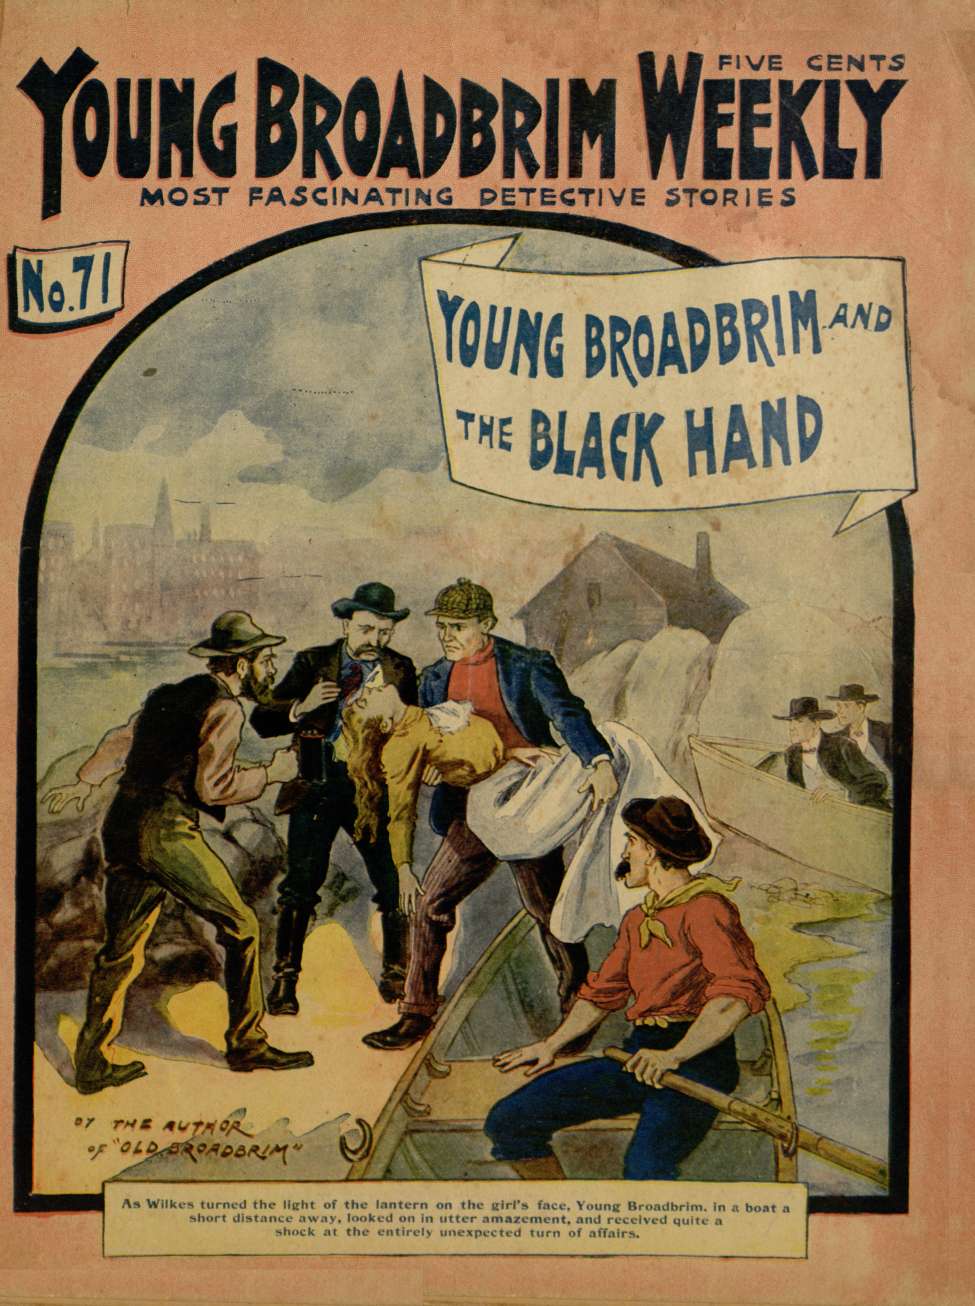 Comic Book Cover For Young Broadbrim Weekly 71